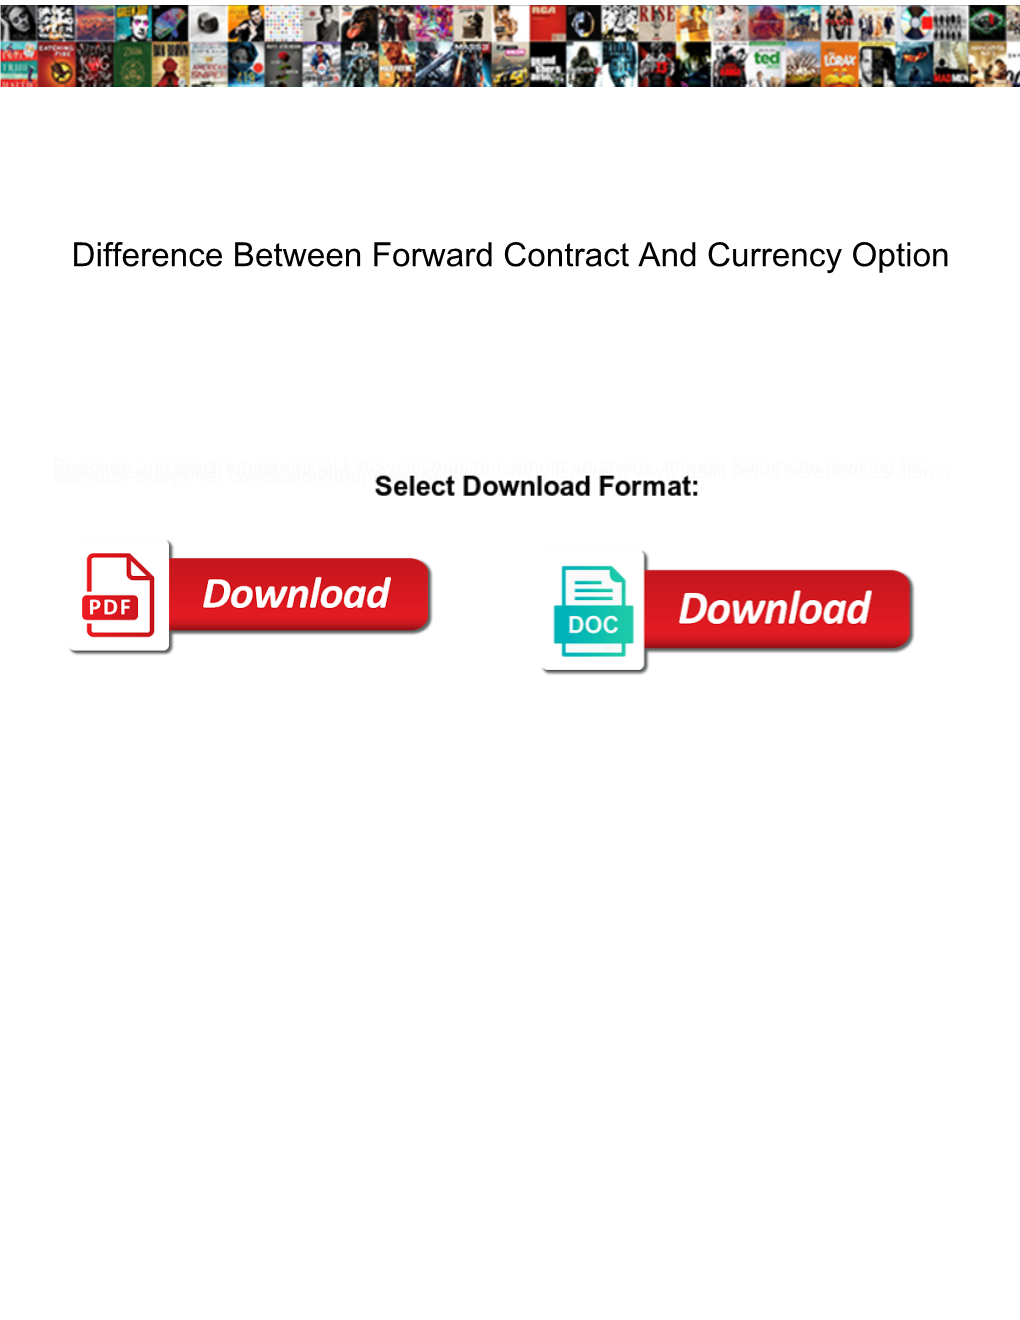 Difference Between Forward Contract and Currency Option